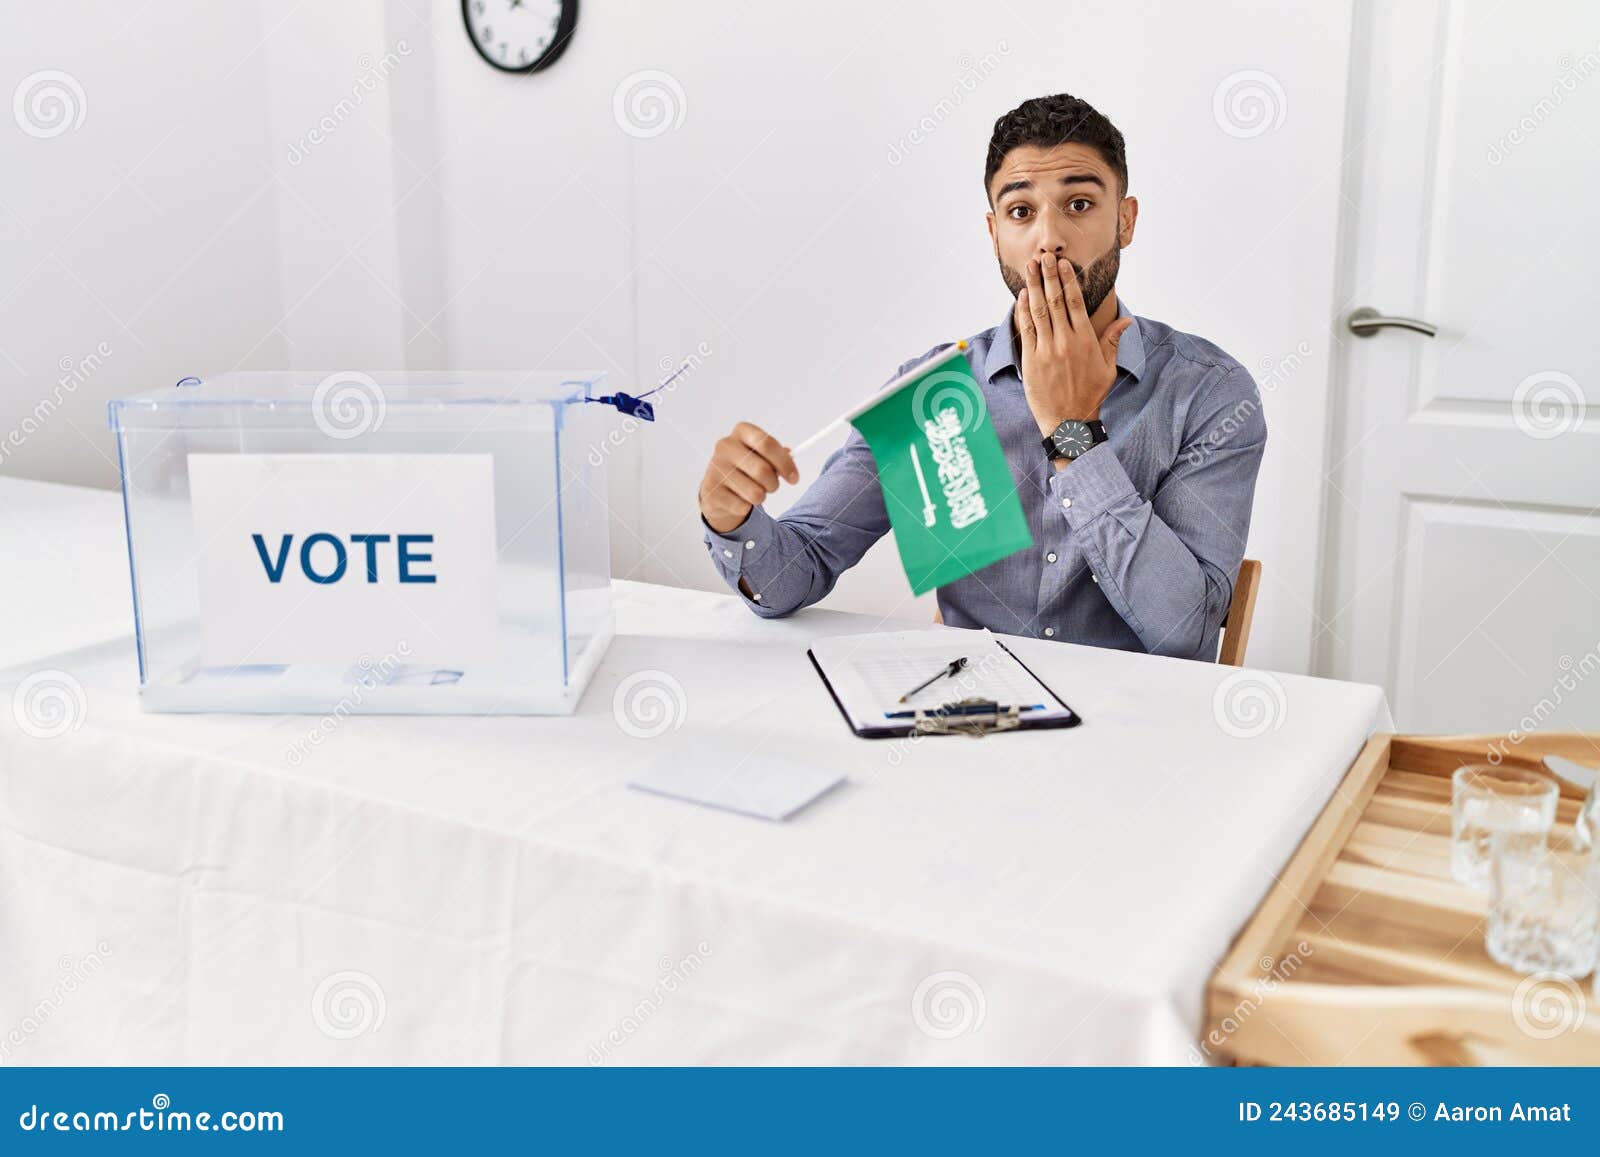 young handsome man with beard at political campaign election holding arabia saudita flag covering mouth with hand, shocked and